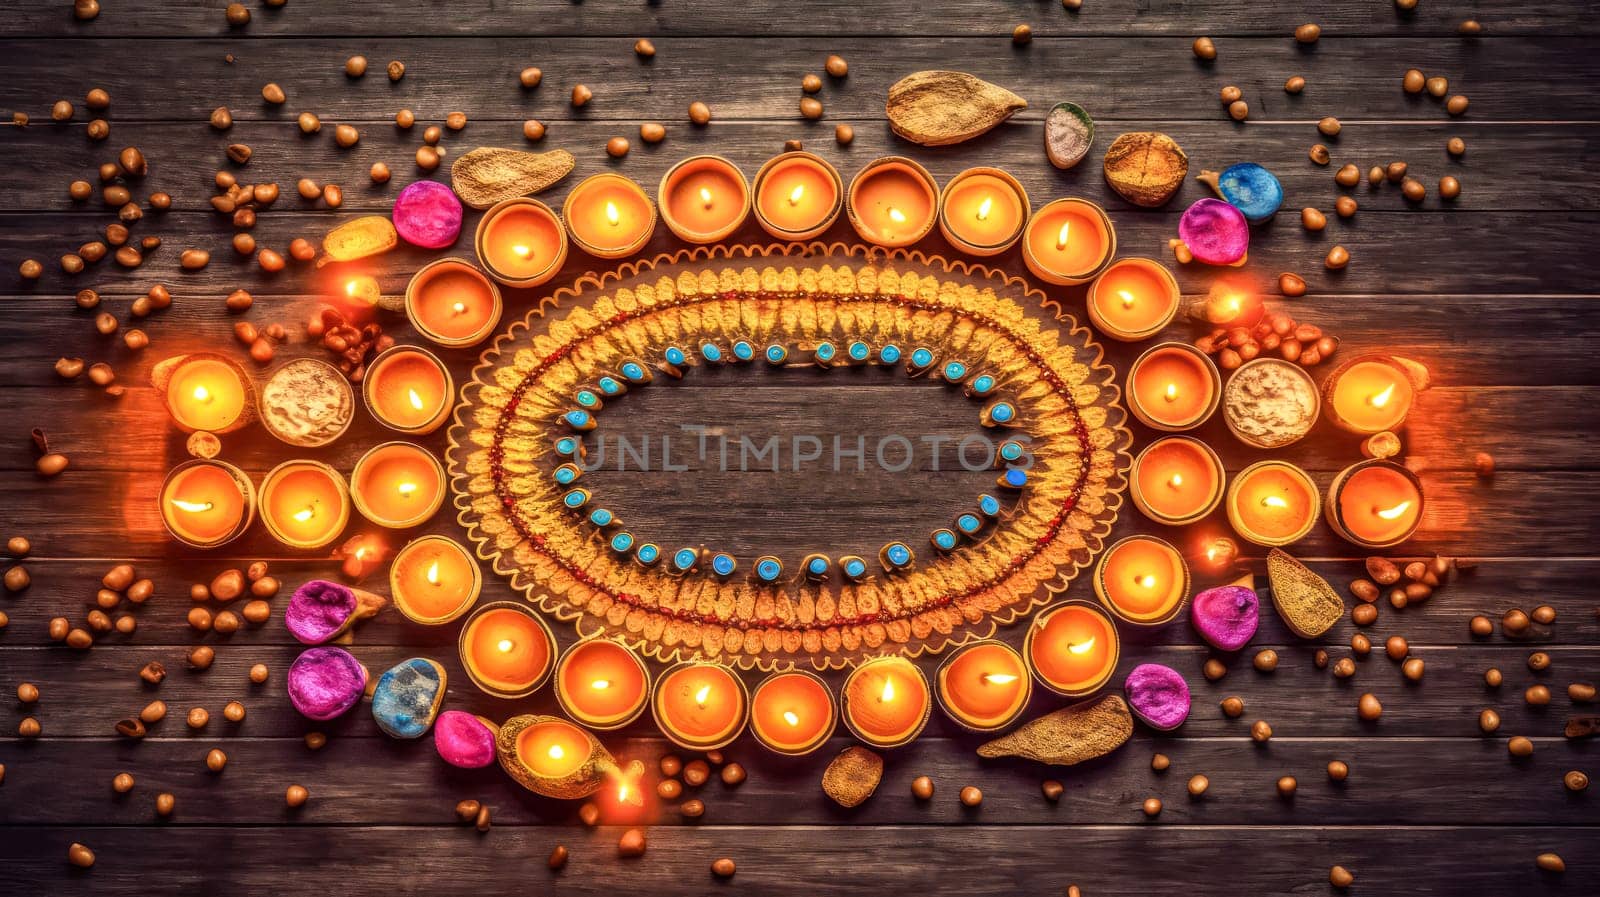 A colorful candle arrangement with many candles lit. by Alla_Morozova93